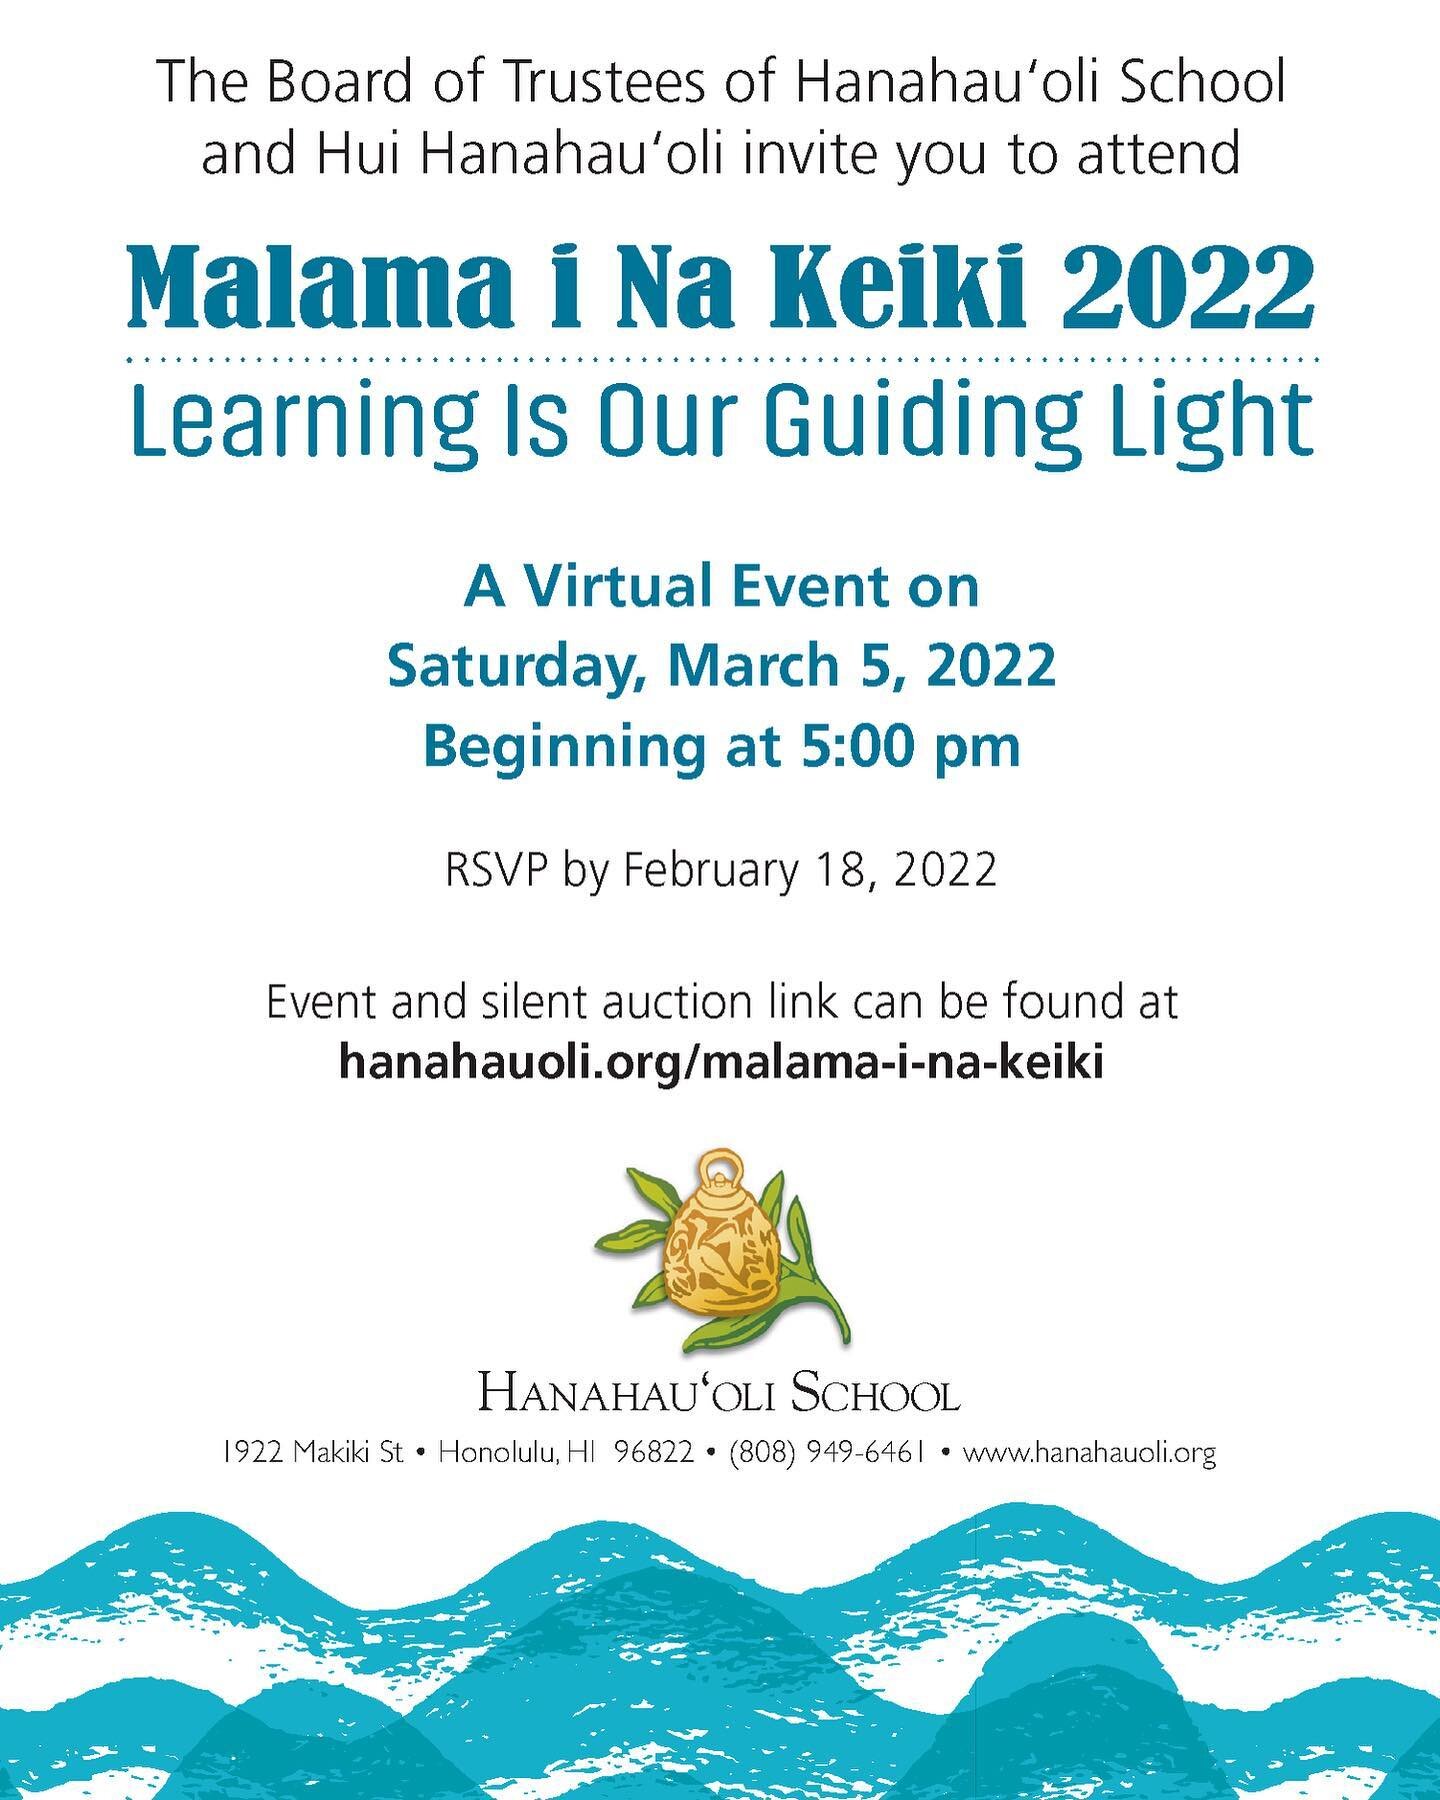 Visit www.hanahauoli.org/malama-i-na-keiki to view the invitation and reply card for this year&rsquo;s virtual event! Dinner RSVPs due February 18th! 🧡🤍